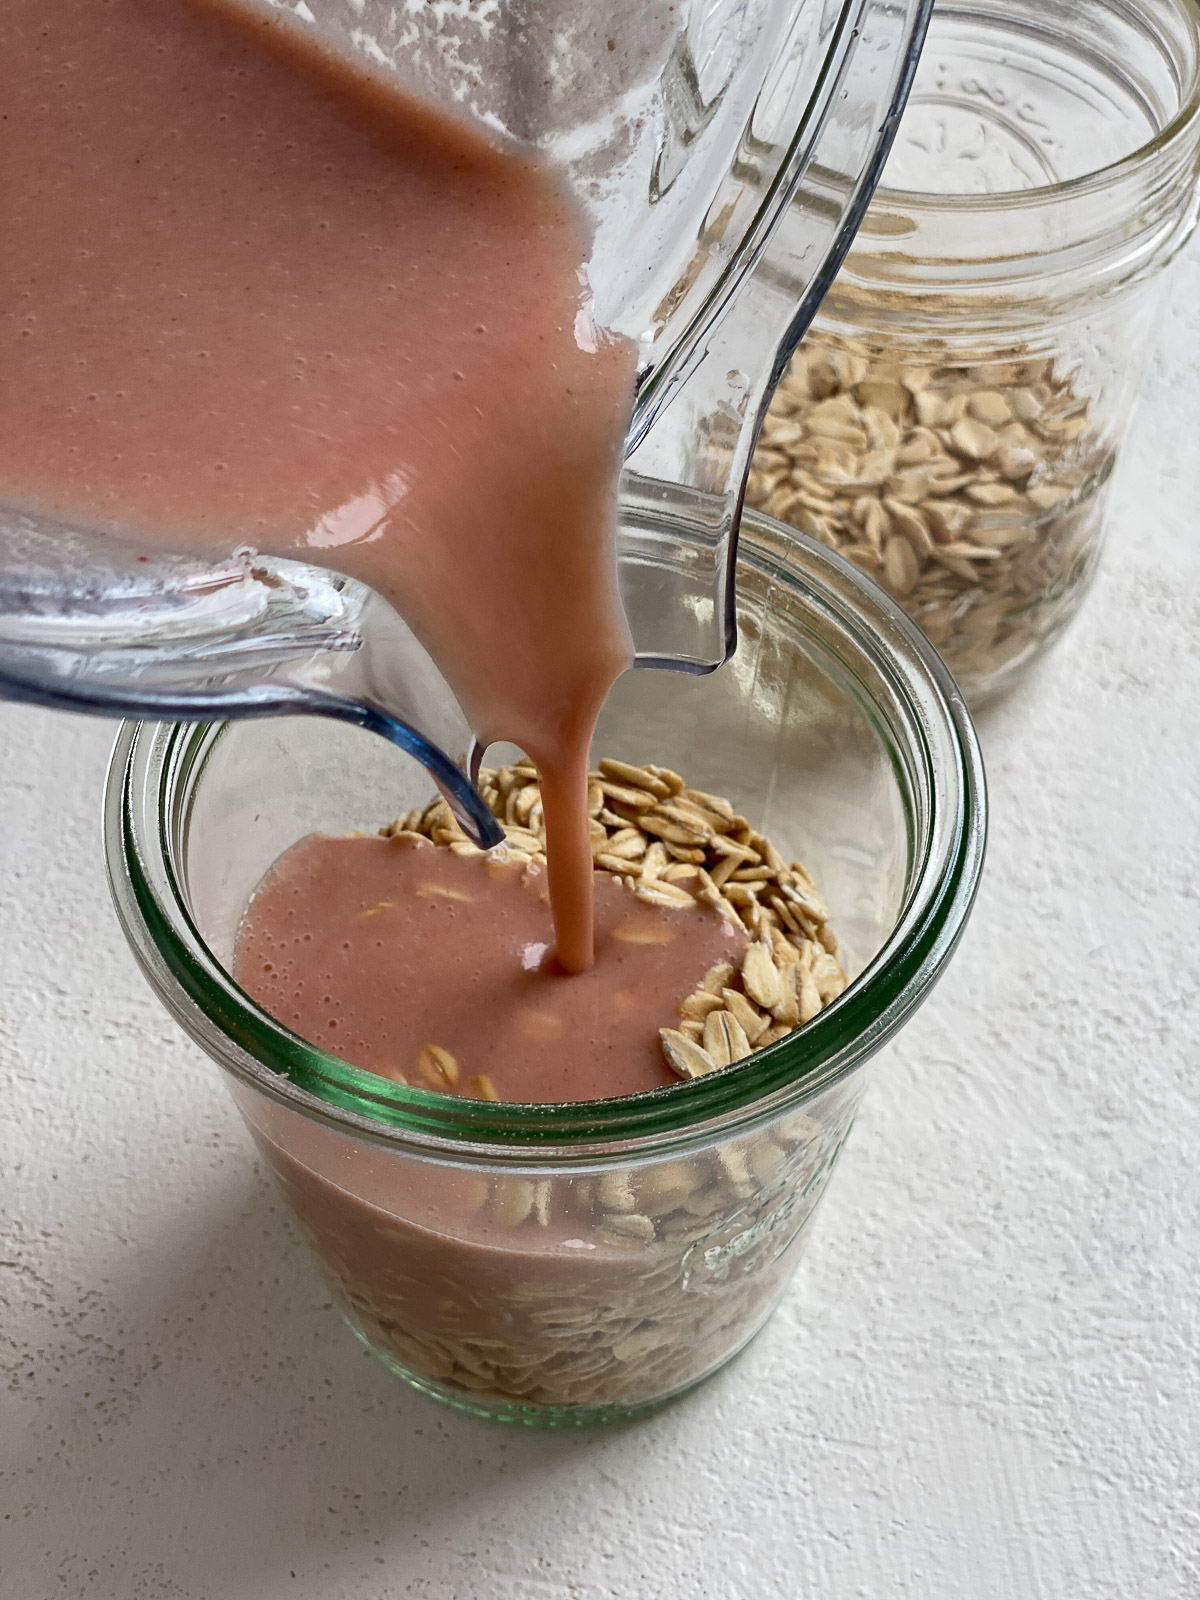 process of mixture being added to glass jar of oats